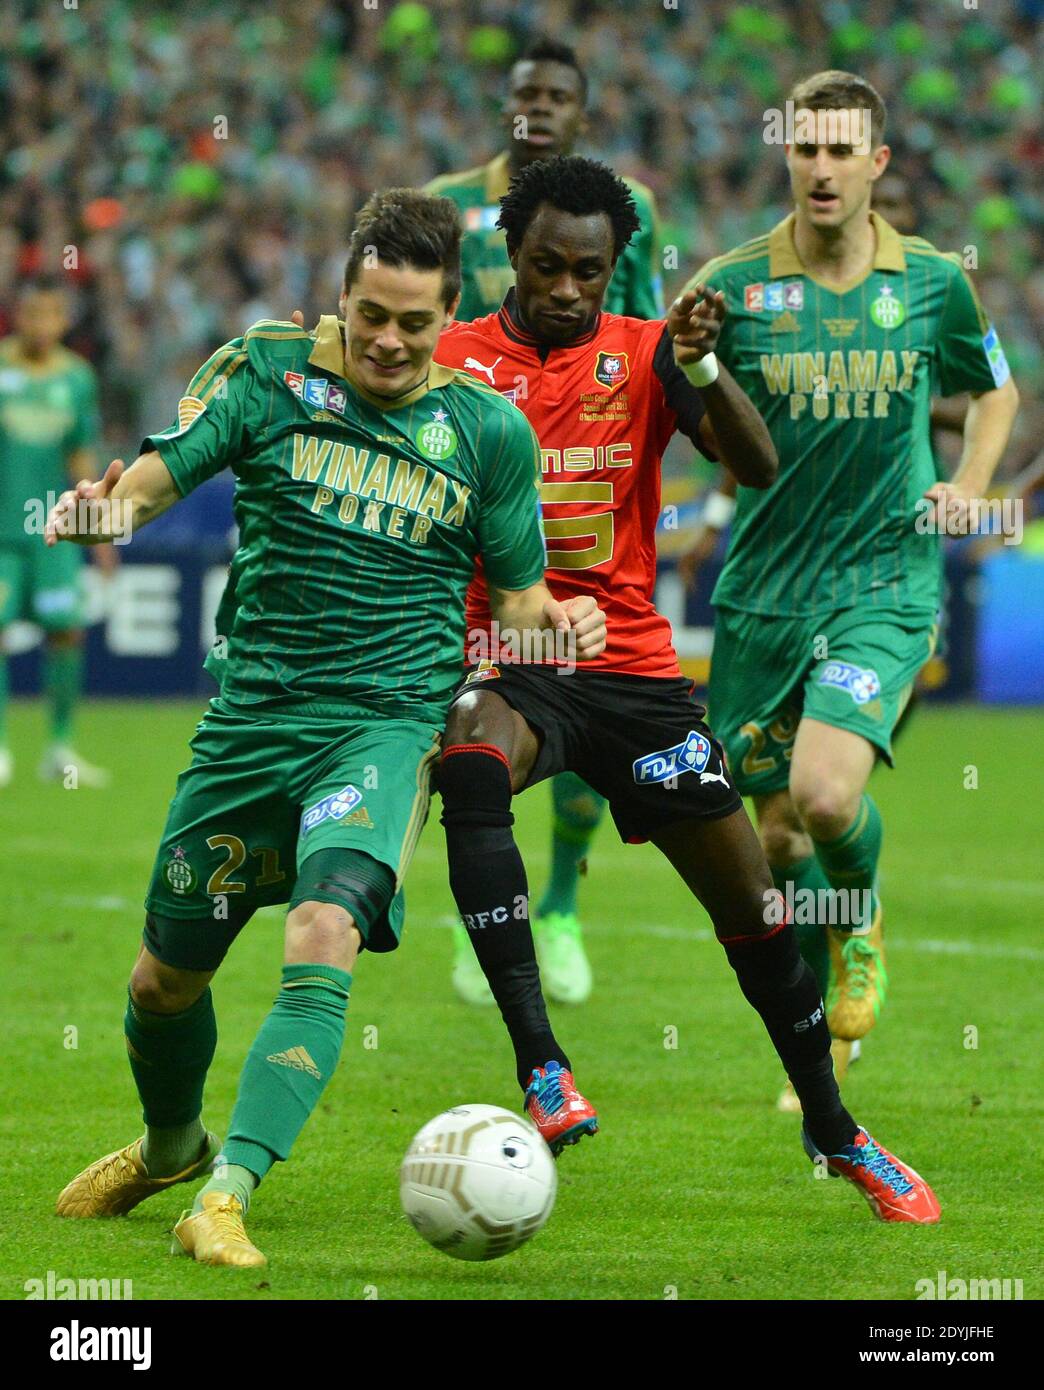 St-Etienne's Romain Hamouma during the French League Cup Final soccer  match, Rennes vs St-Etienne